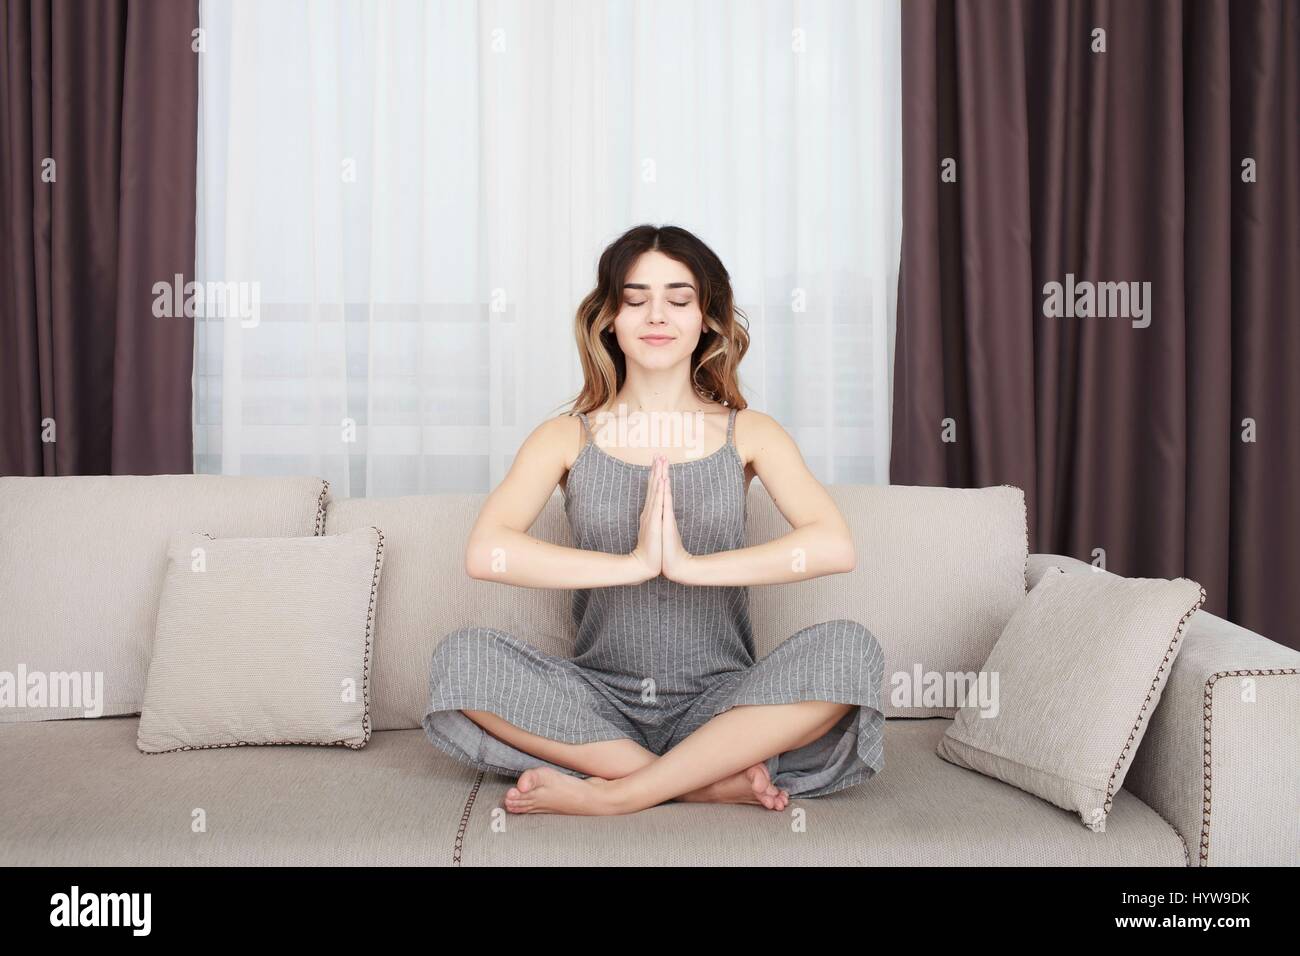 Young woman sitting on a sofa in the lotus position meditating Stock Photo